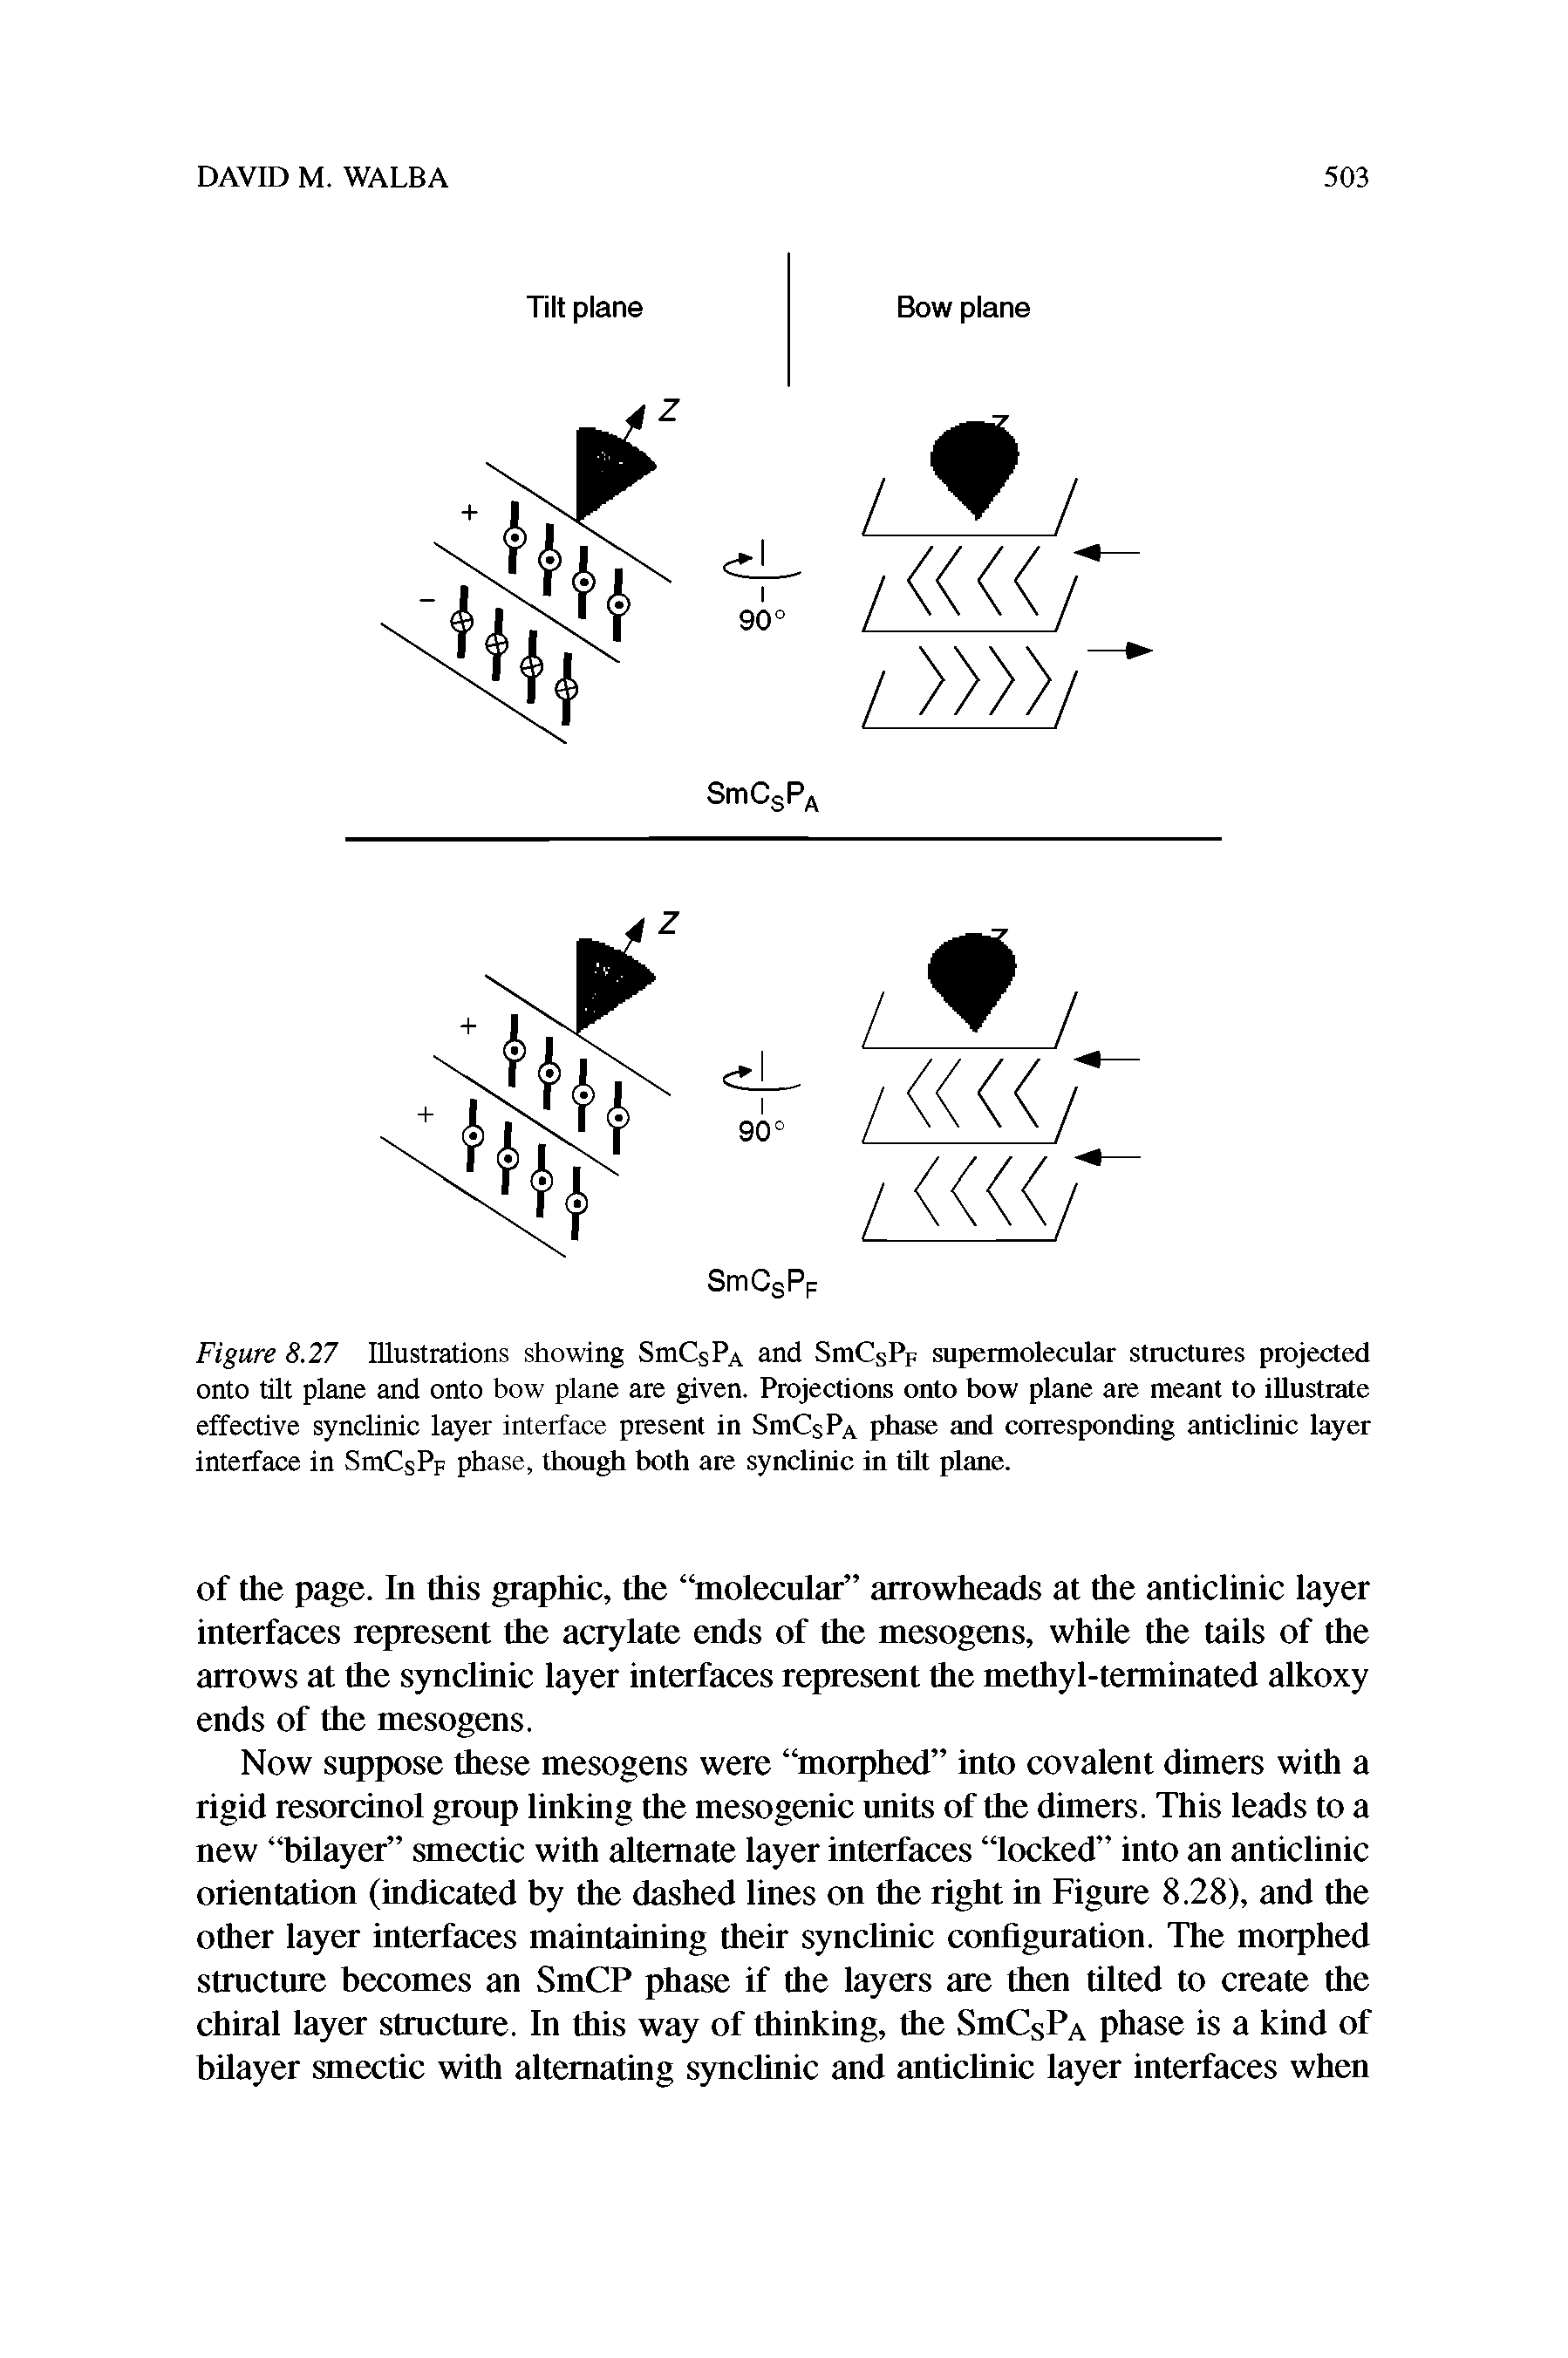 Figure 8.27 Illustrations showing SmCsPA and SniCsP. supermolecular structures projected onto tilt plane and onto bow plane are given. Projections onto bow plane are meant to illustrate effective synclinic layer interface present in SmCsPA phase and corresponding anticlinic layer interface in SmCsPF phase, though both are synclinic in tilt plane.